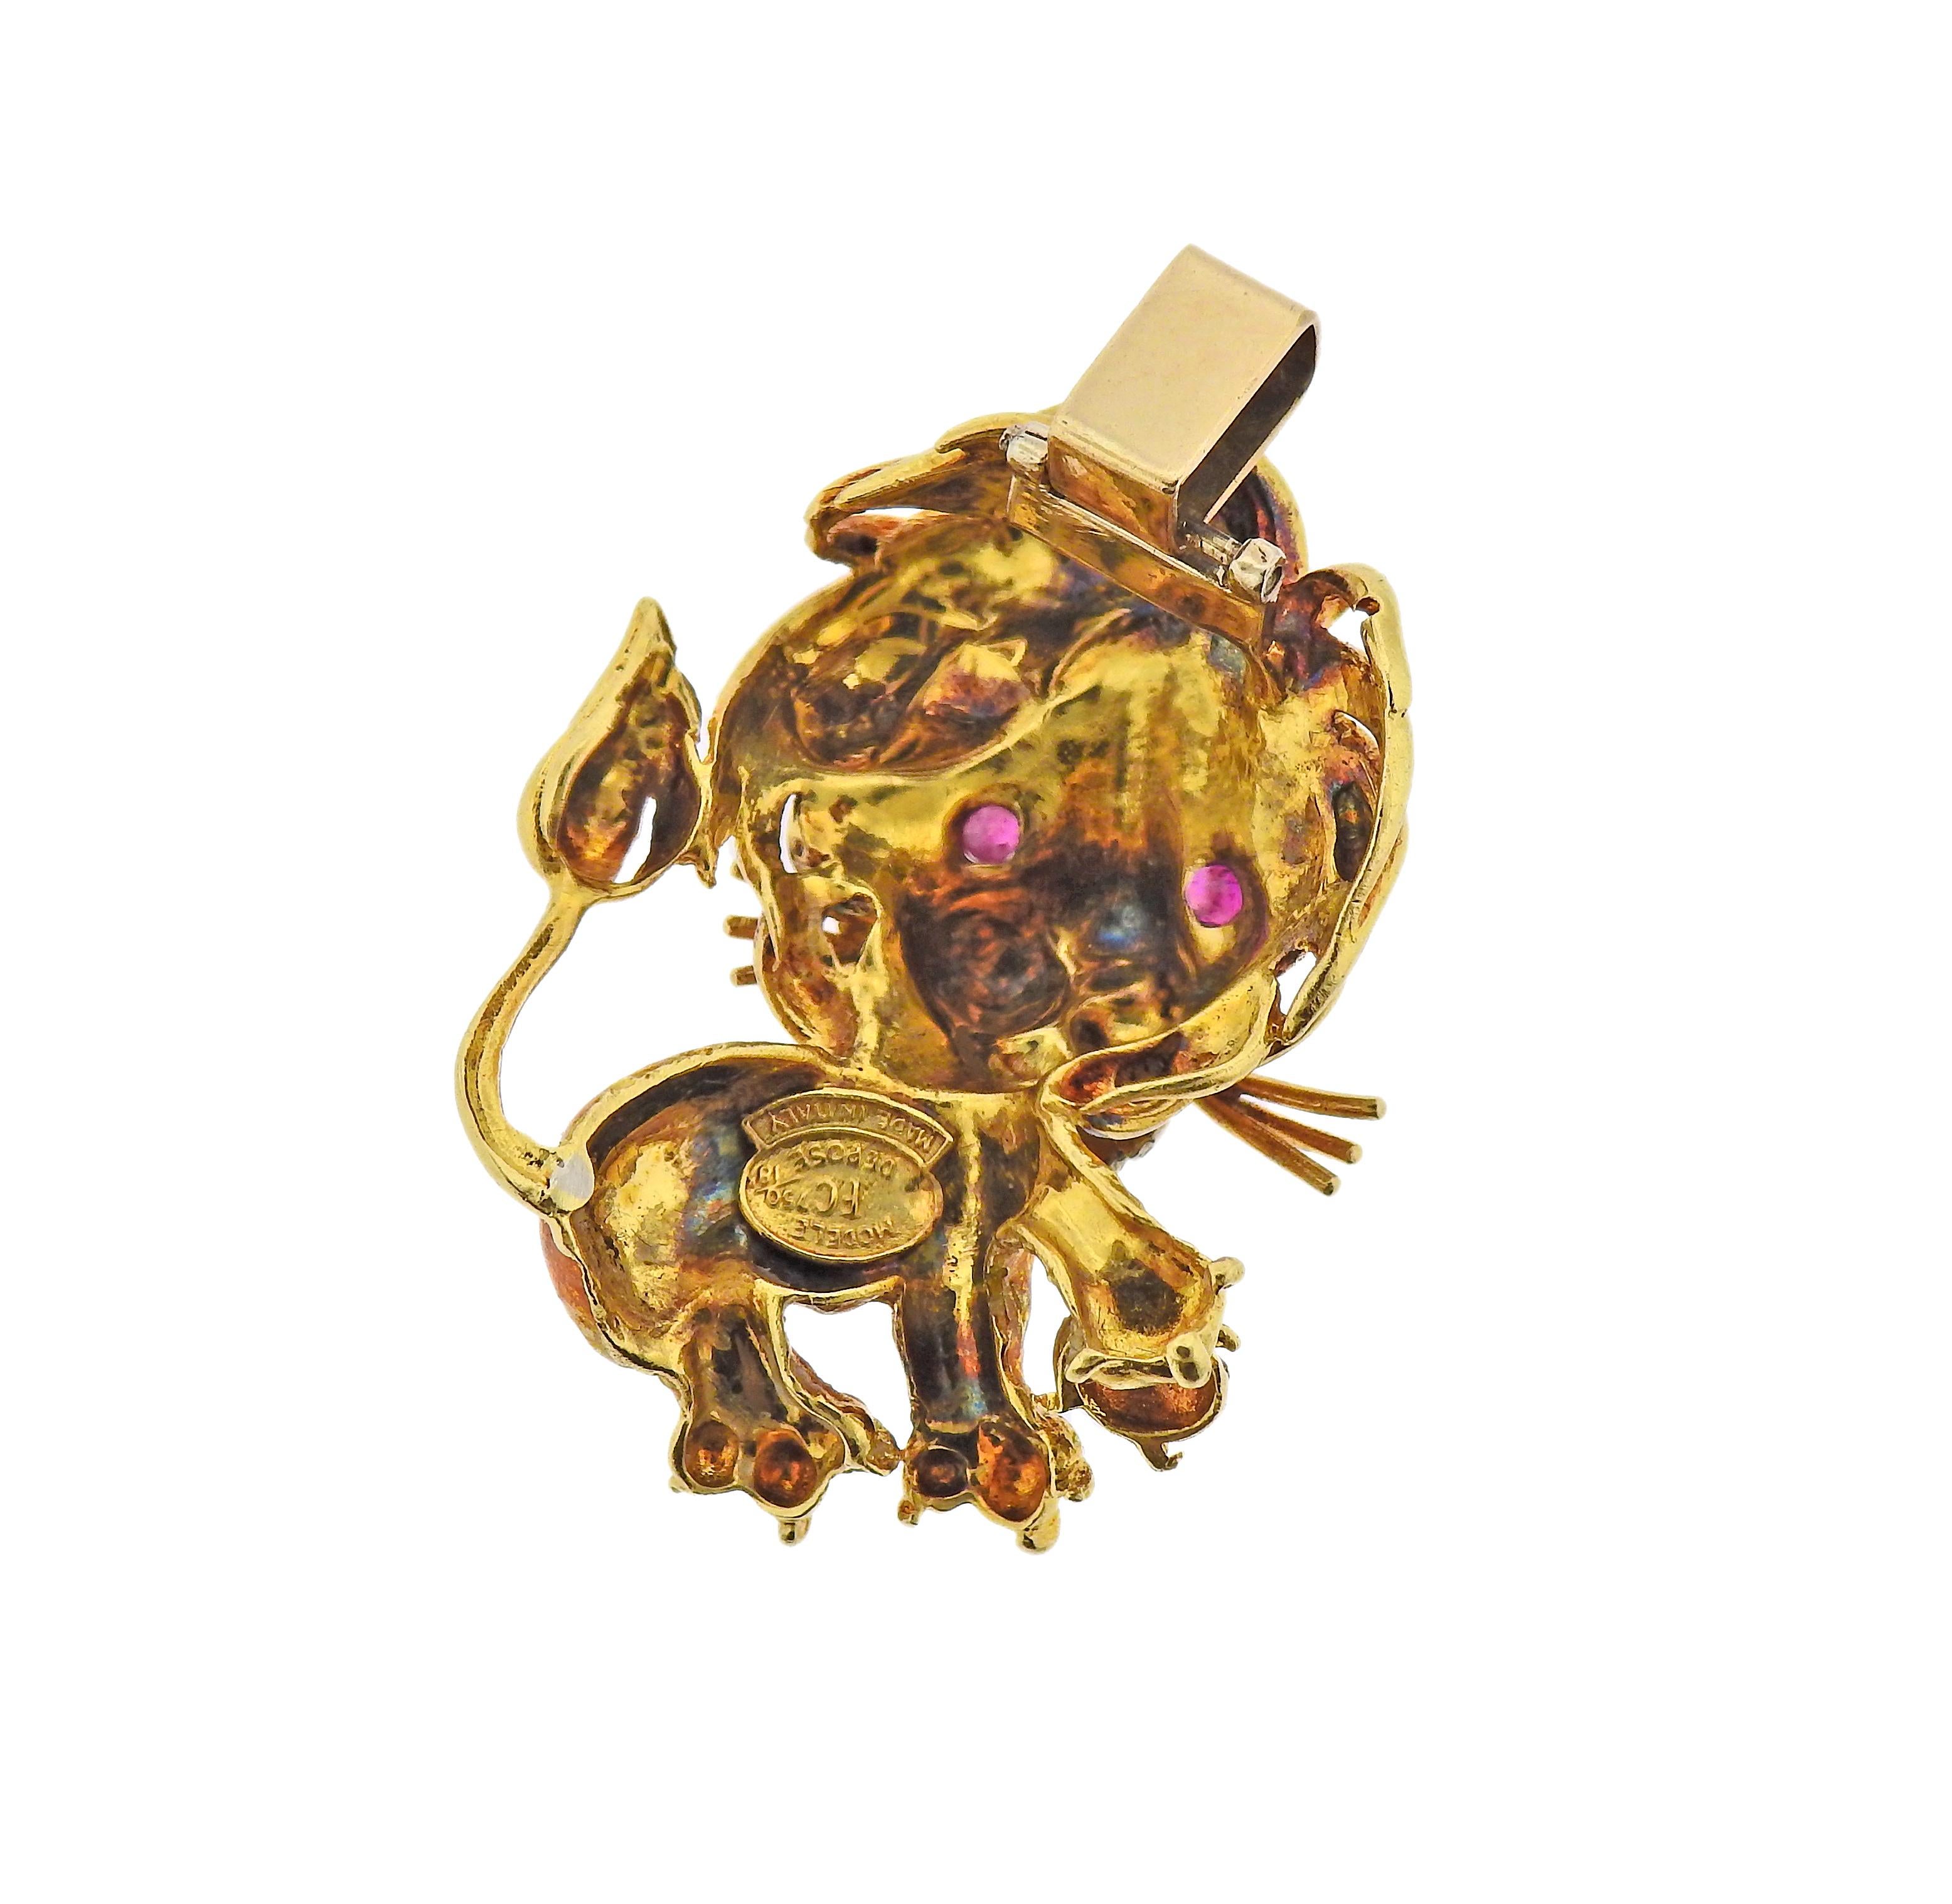 18k gold lion pendant by Frascarolo, with ruby eyes and diamonds on the beard. Pendant is 42mm x 30mm. Marked: FC mark, Modele Depose, 18ct, made in Italy. Weight - 19.3 grams. 